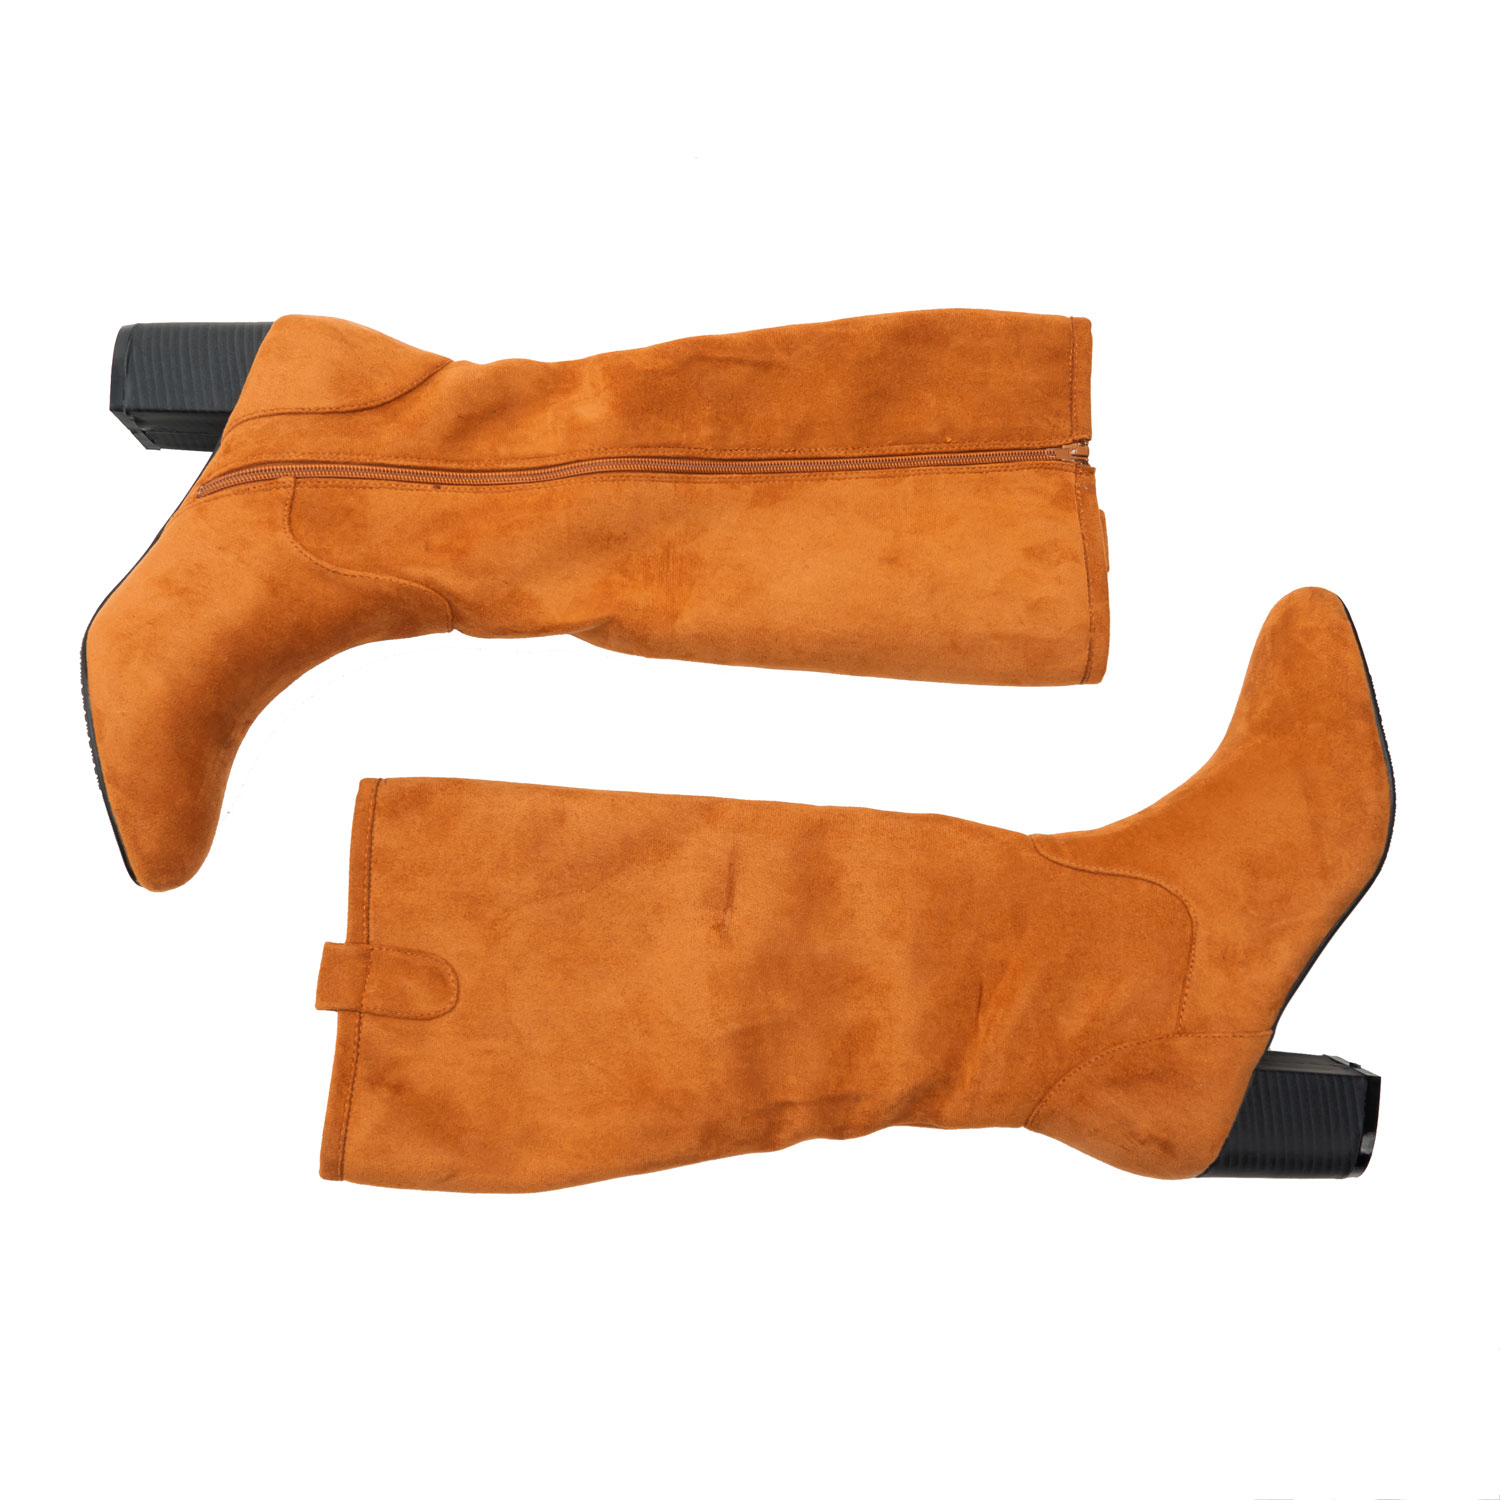 High Calf Boots in Camel Suedette 